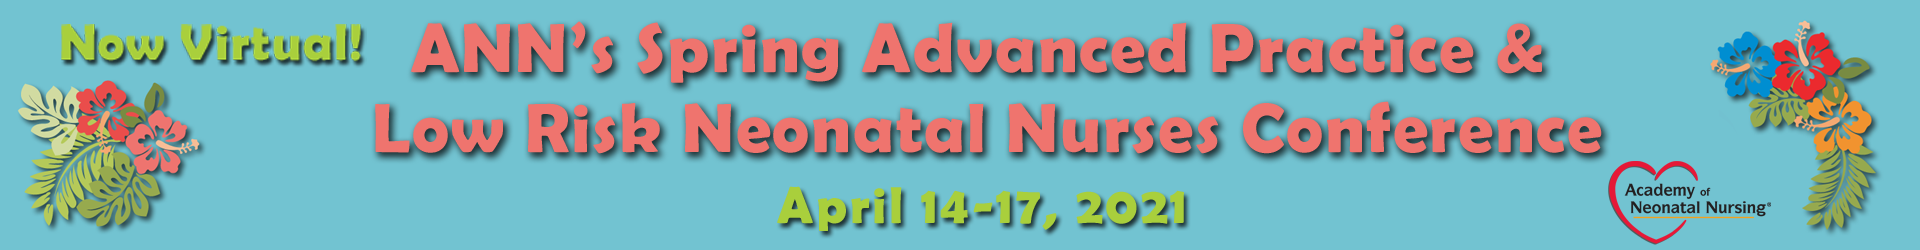 2021 Spring National Advanced Practice Neonatal Nurses Conference Event Banner